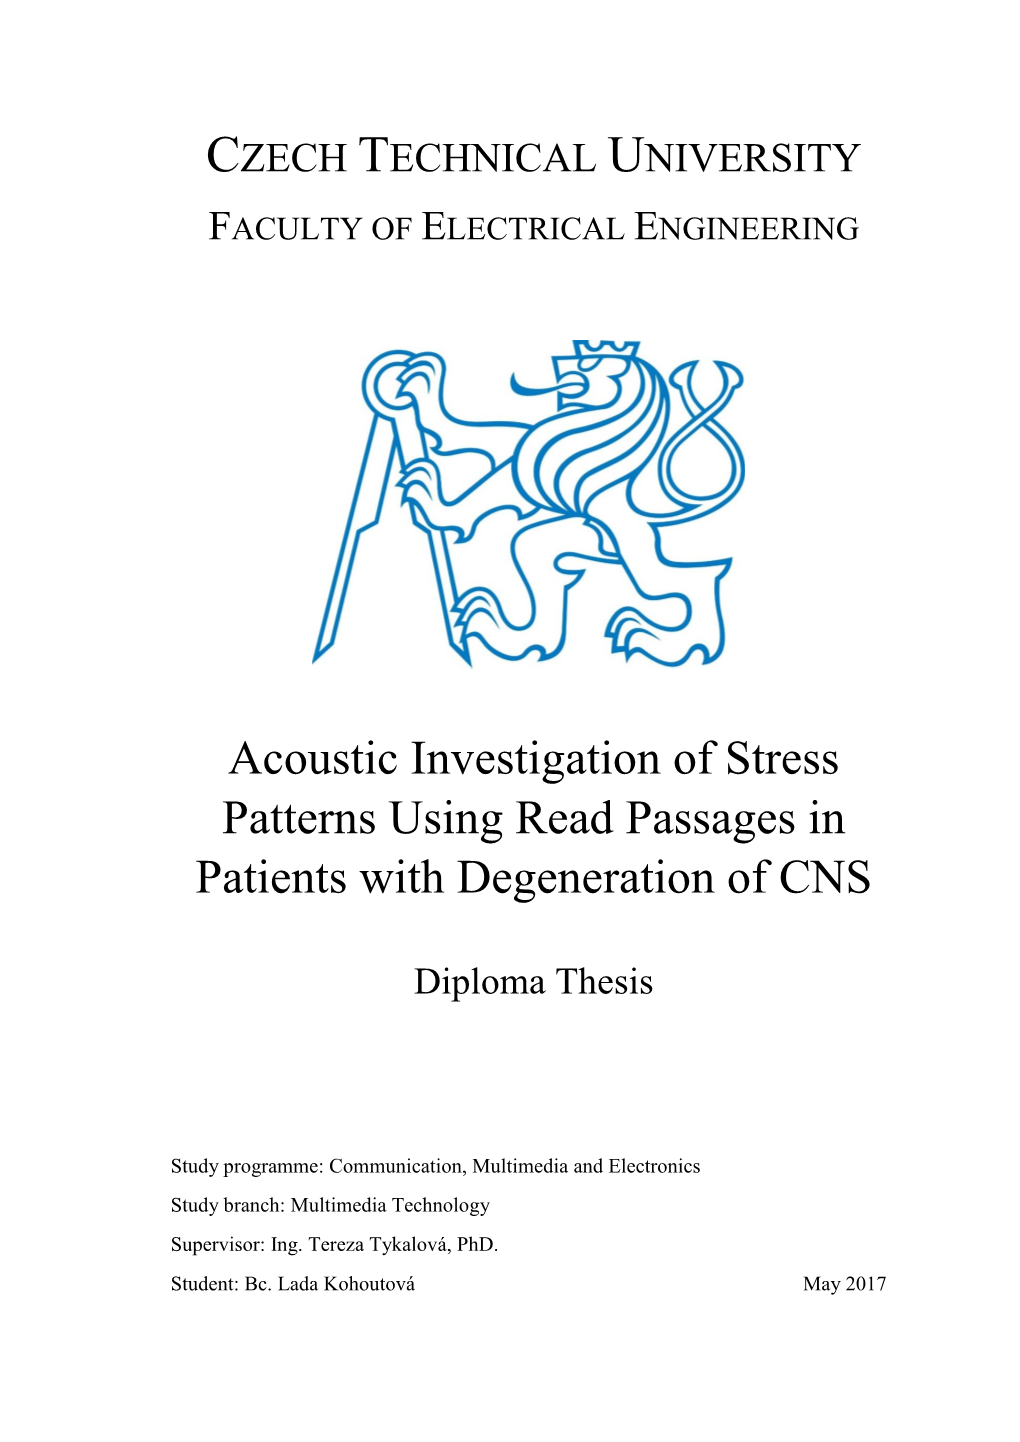 Acoustic Investigation of Stress Patterns Using Read Passages in Patients with Degeneration of CNS